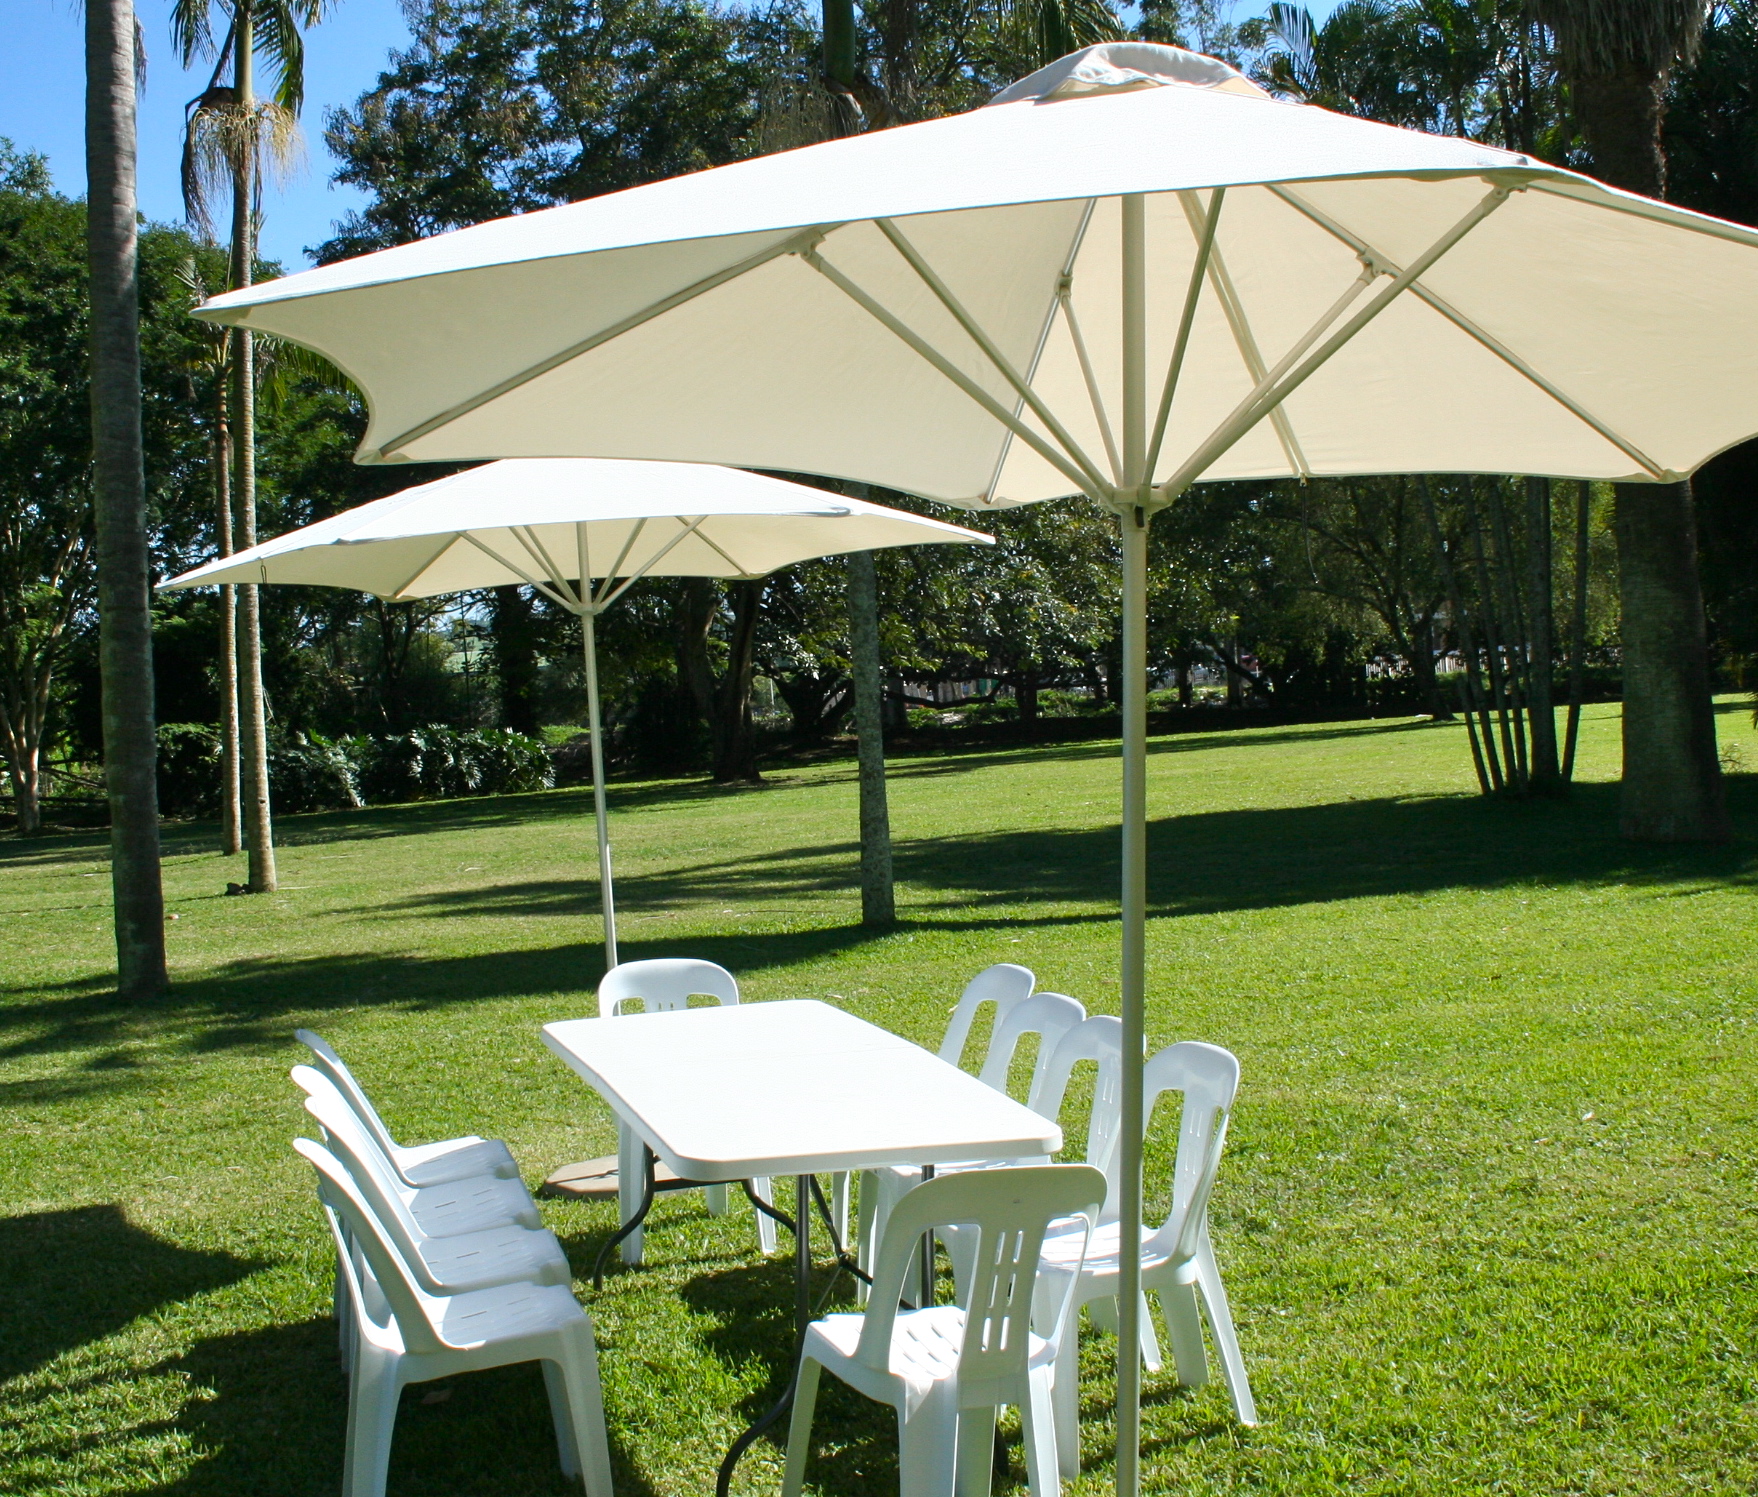 Three Uses to which you can put a Garden Umbrella to